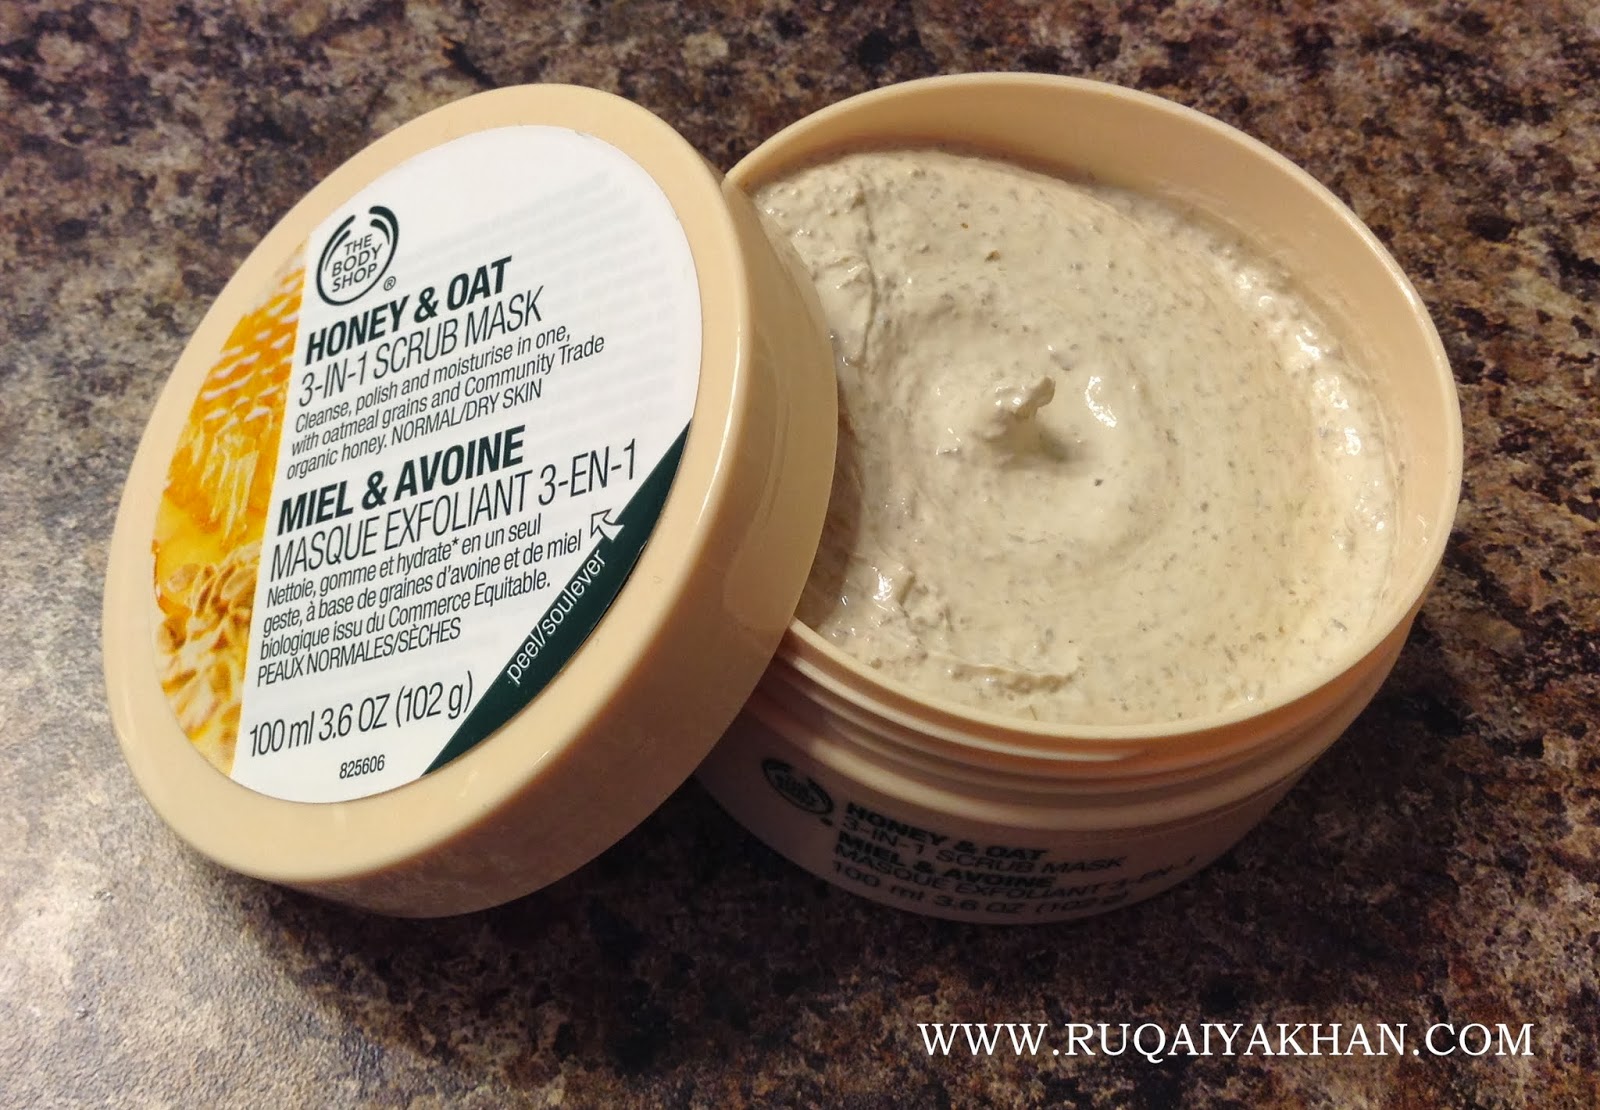 Ruqaiya The Body Shop & Oat 3-in-1 Scrub Mask Review and Photos